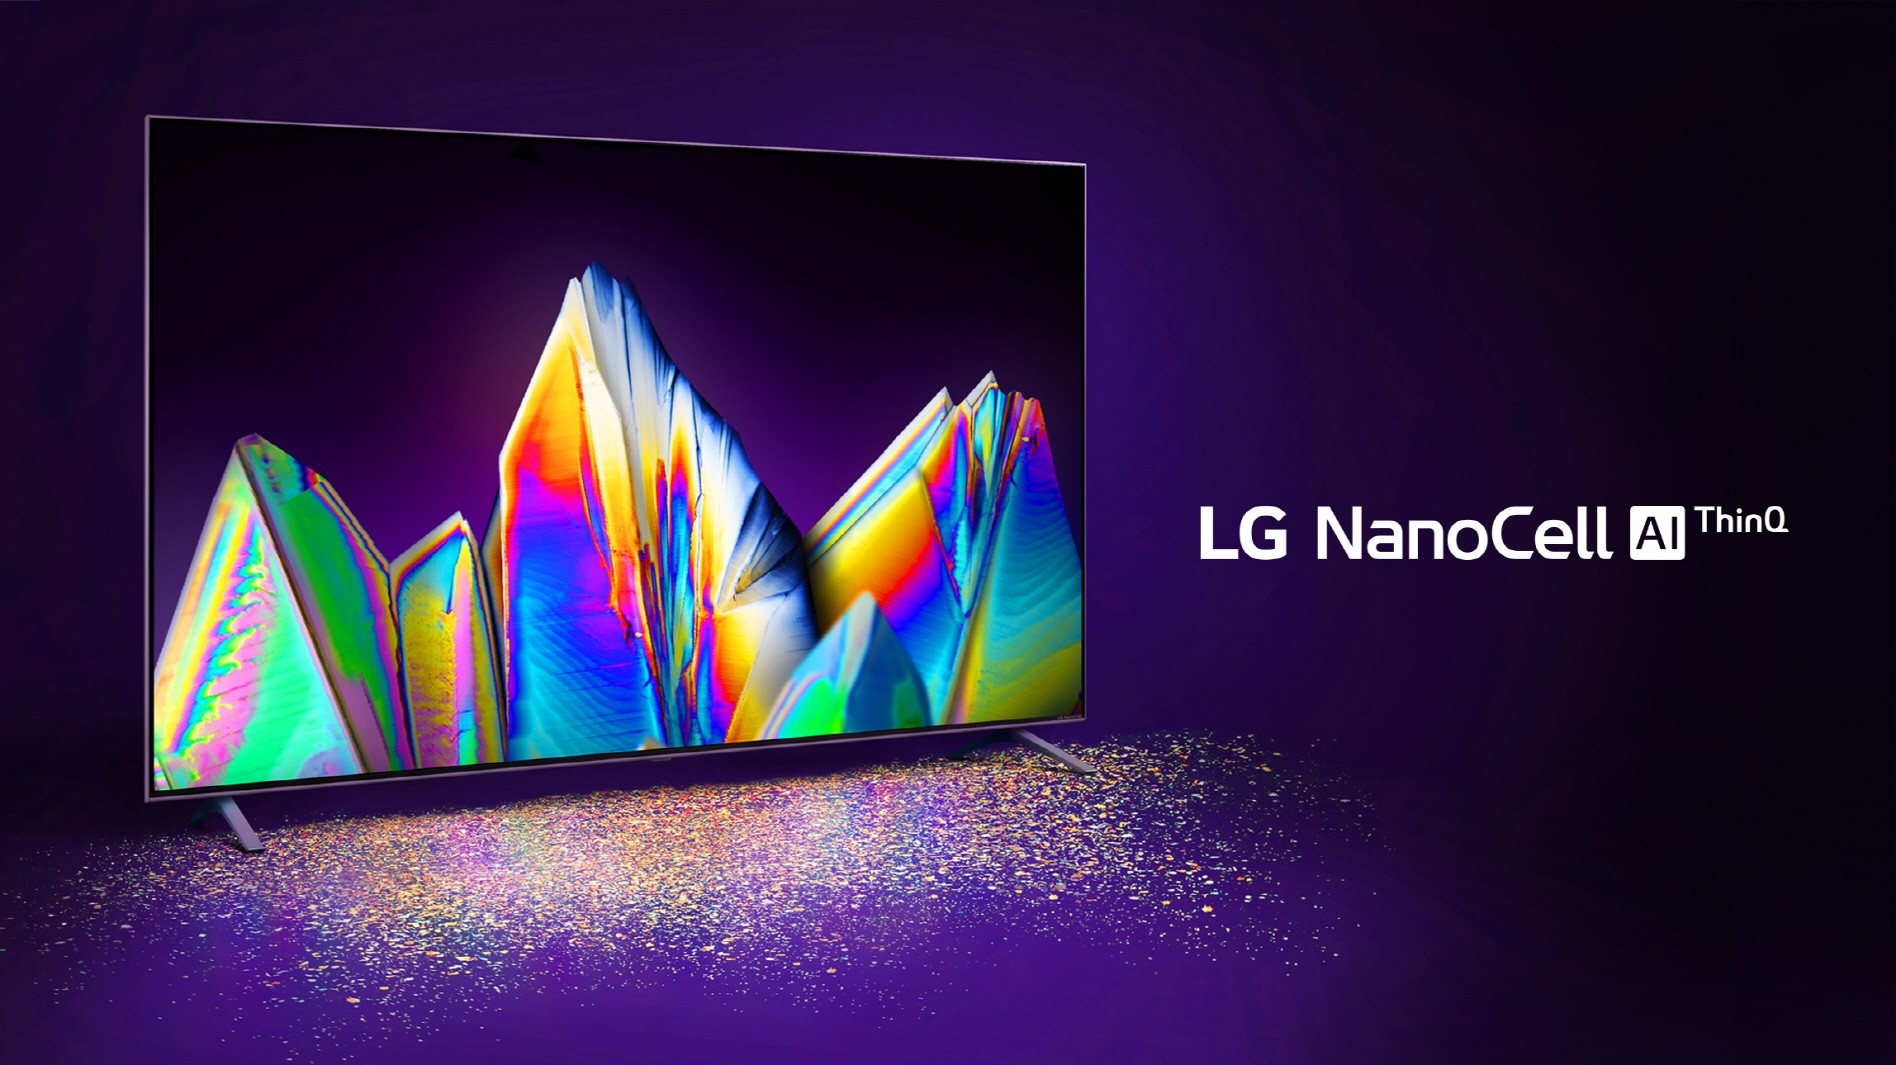 Front view of LG NanoCell TV model Nano99 displaying a wide range of vivid colors in the dark, with the LG NanoCell AI ThinQ logo on the right